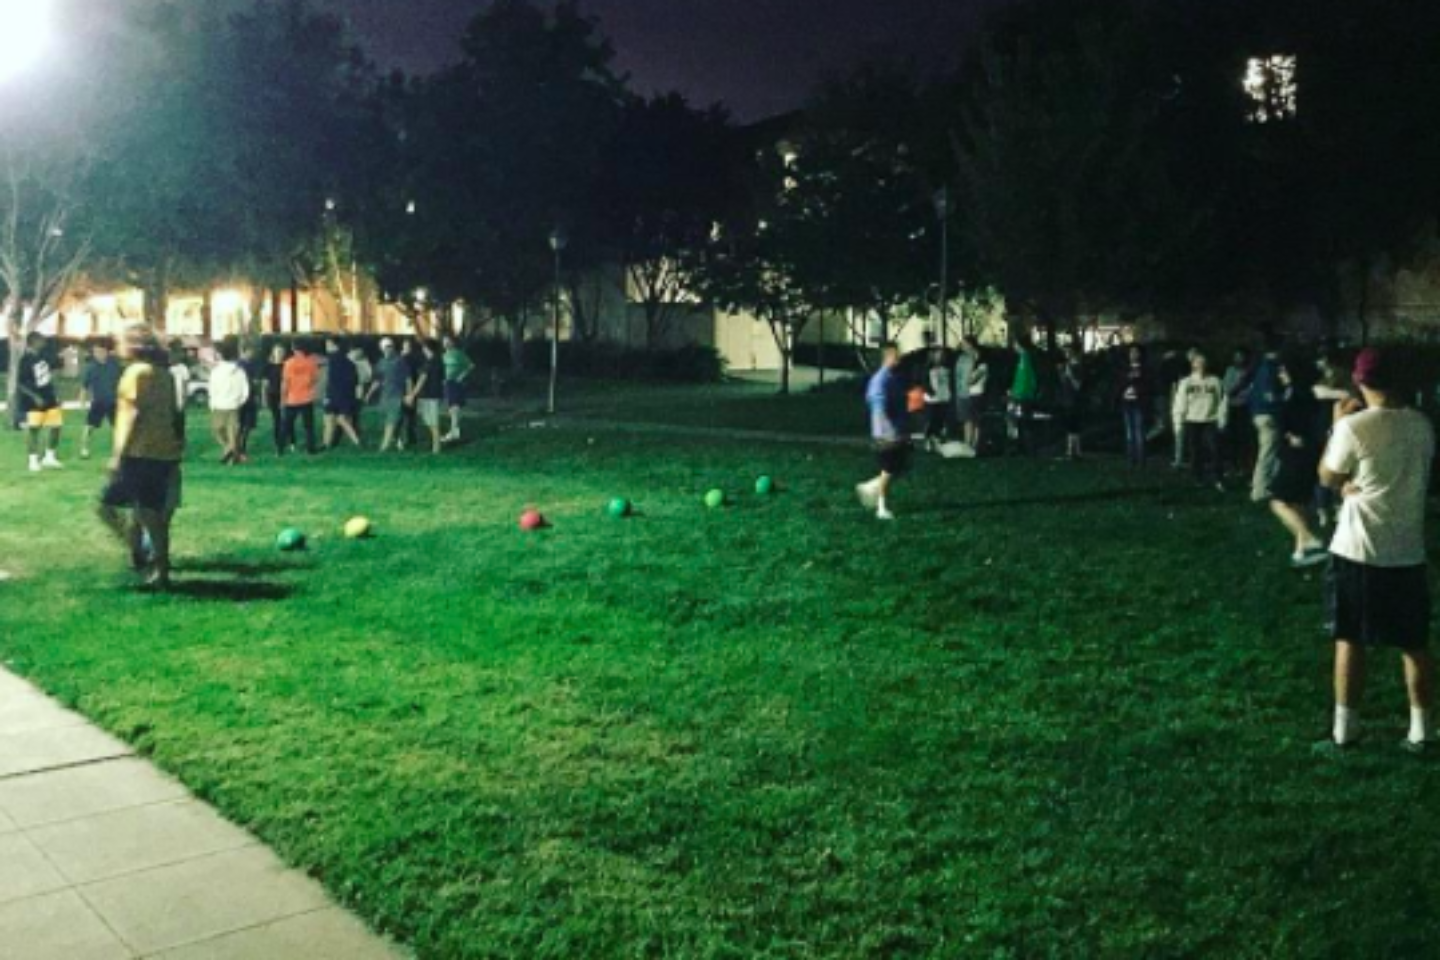 Teams of residents playing dodgeball on a field at night